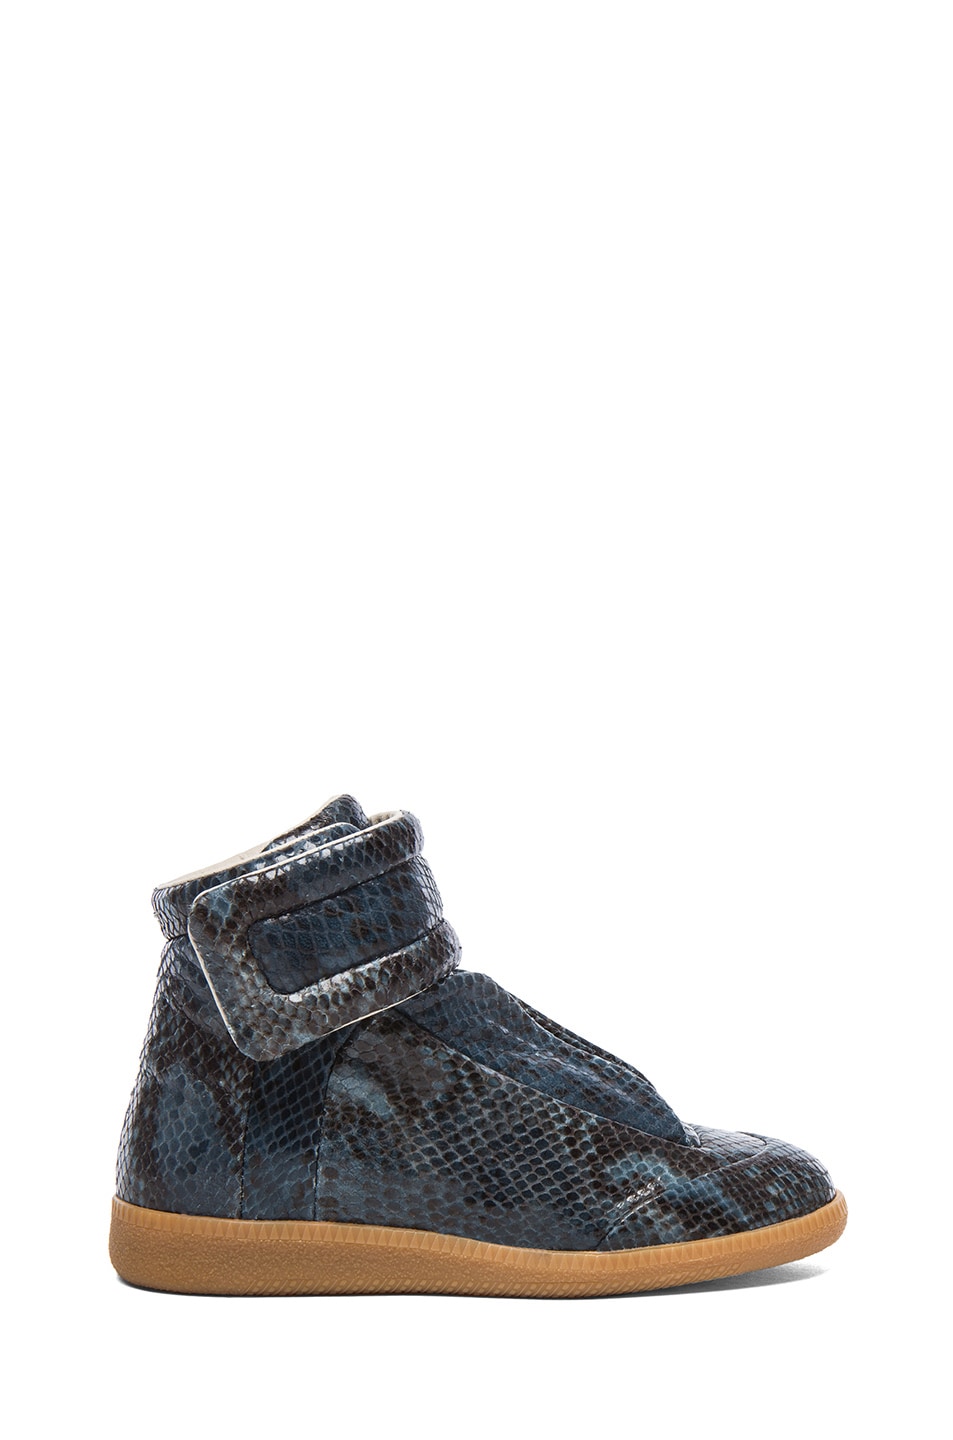 Image 1 of Maison Margiela Future Embossed Leather High Tops in Snake Print